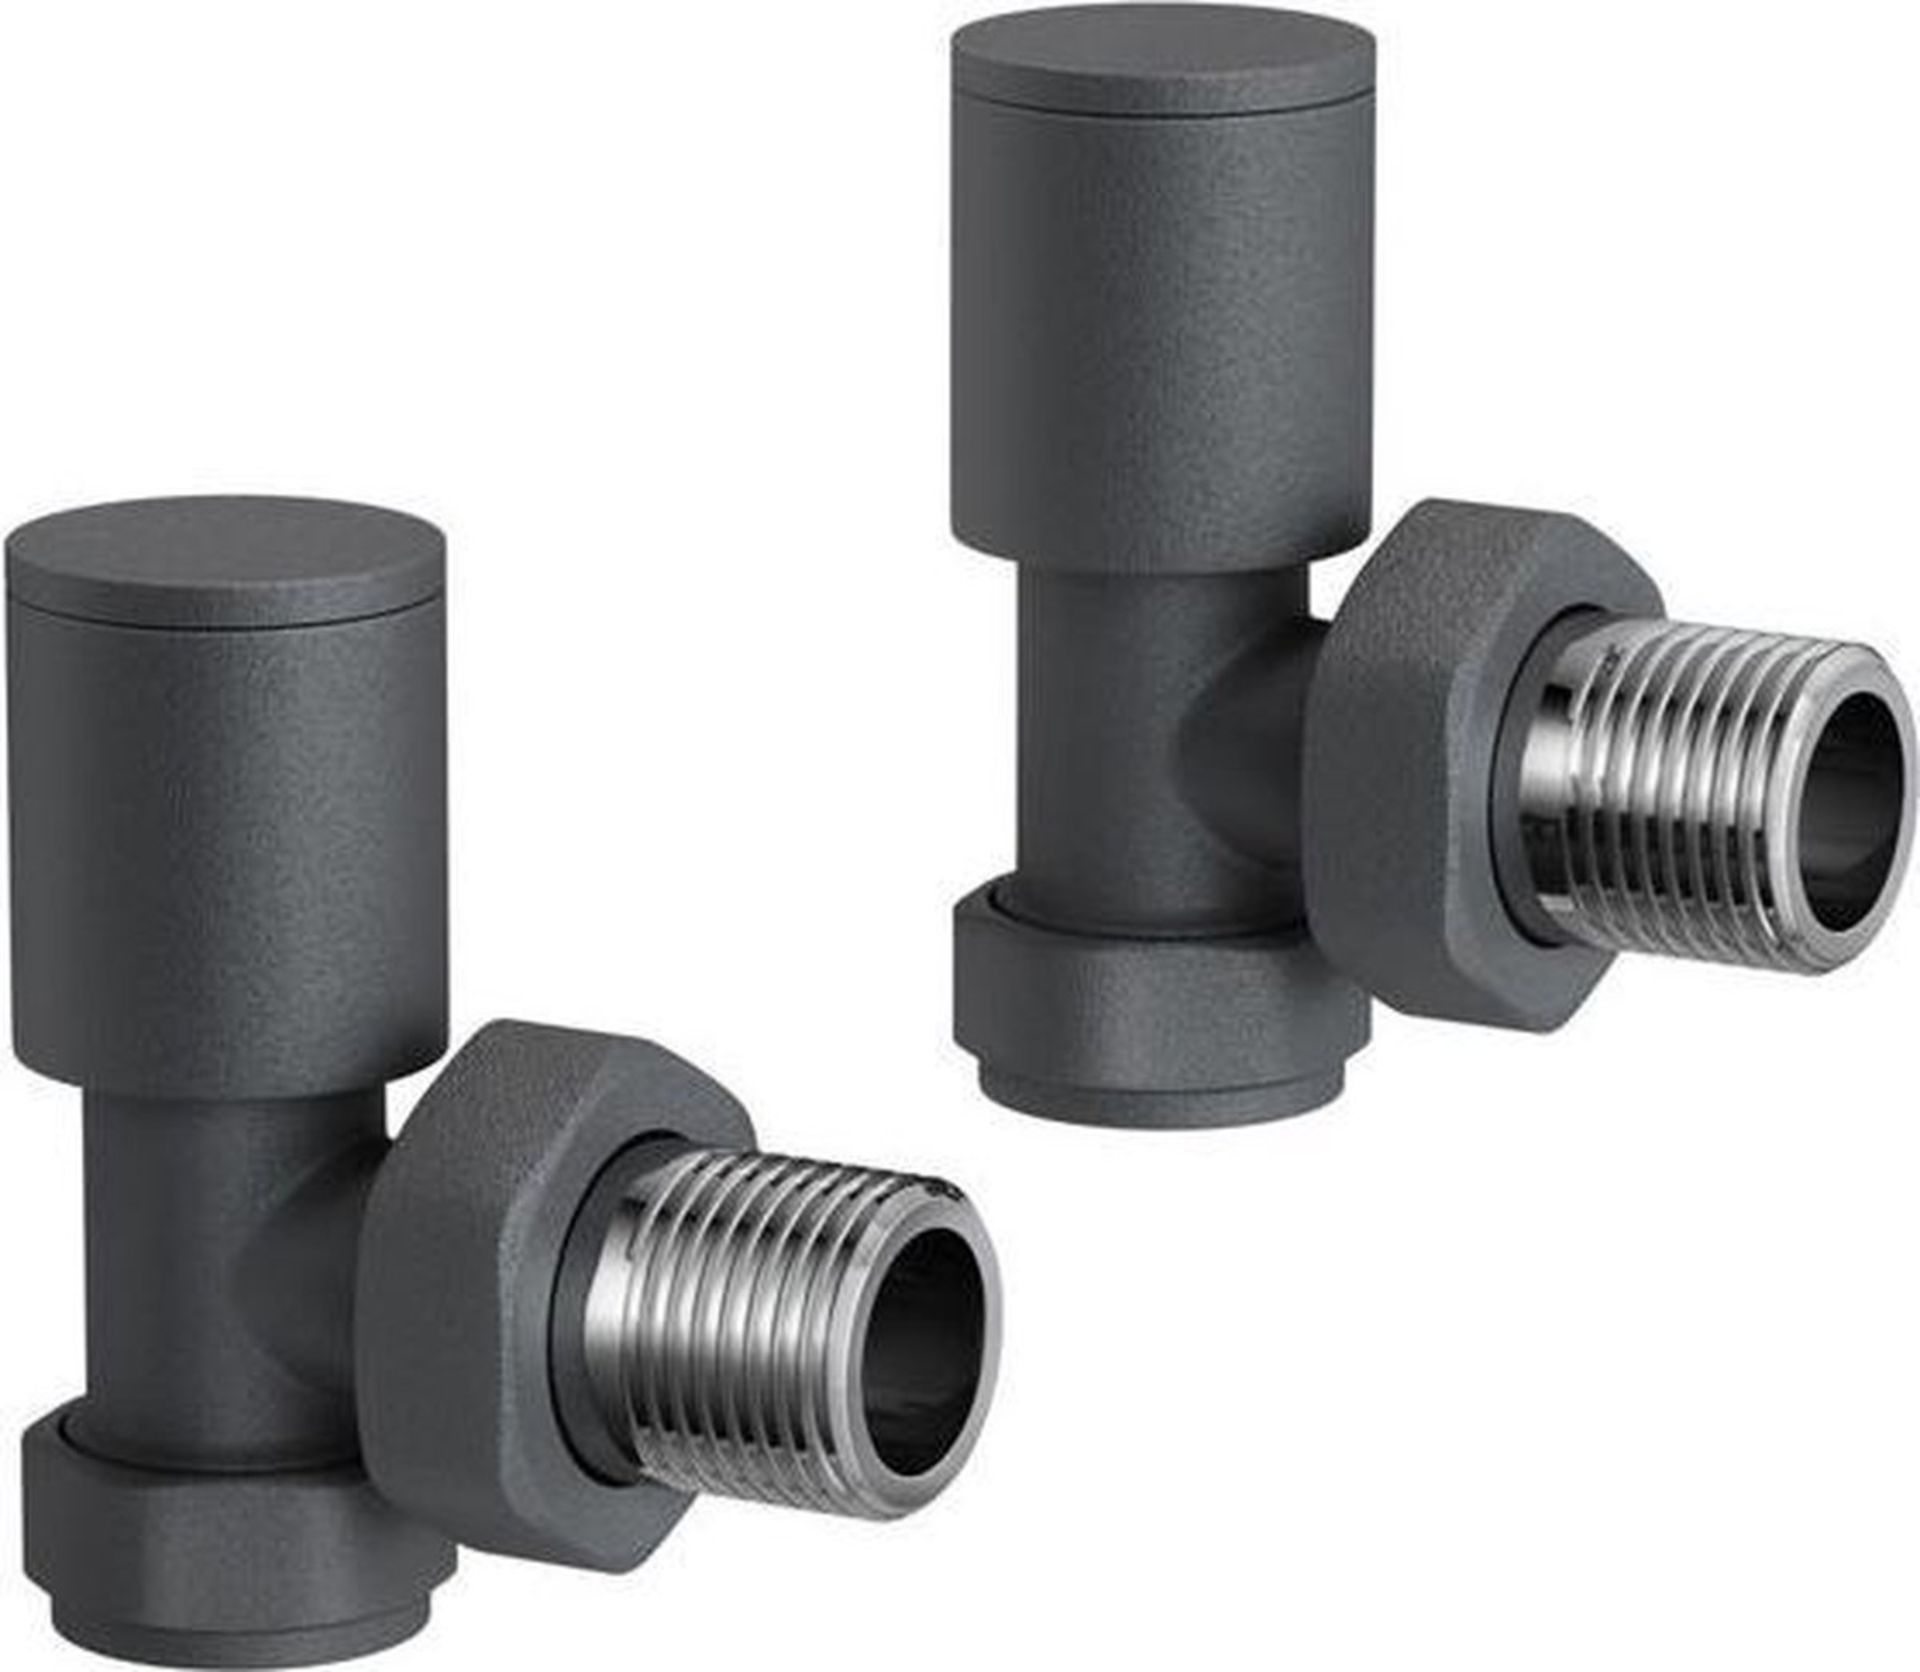 New &; Boxed 15 Mm Standard Connection Square Angled Anthracite Radiator Valves. Ra03A. Compl...